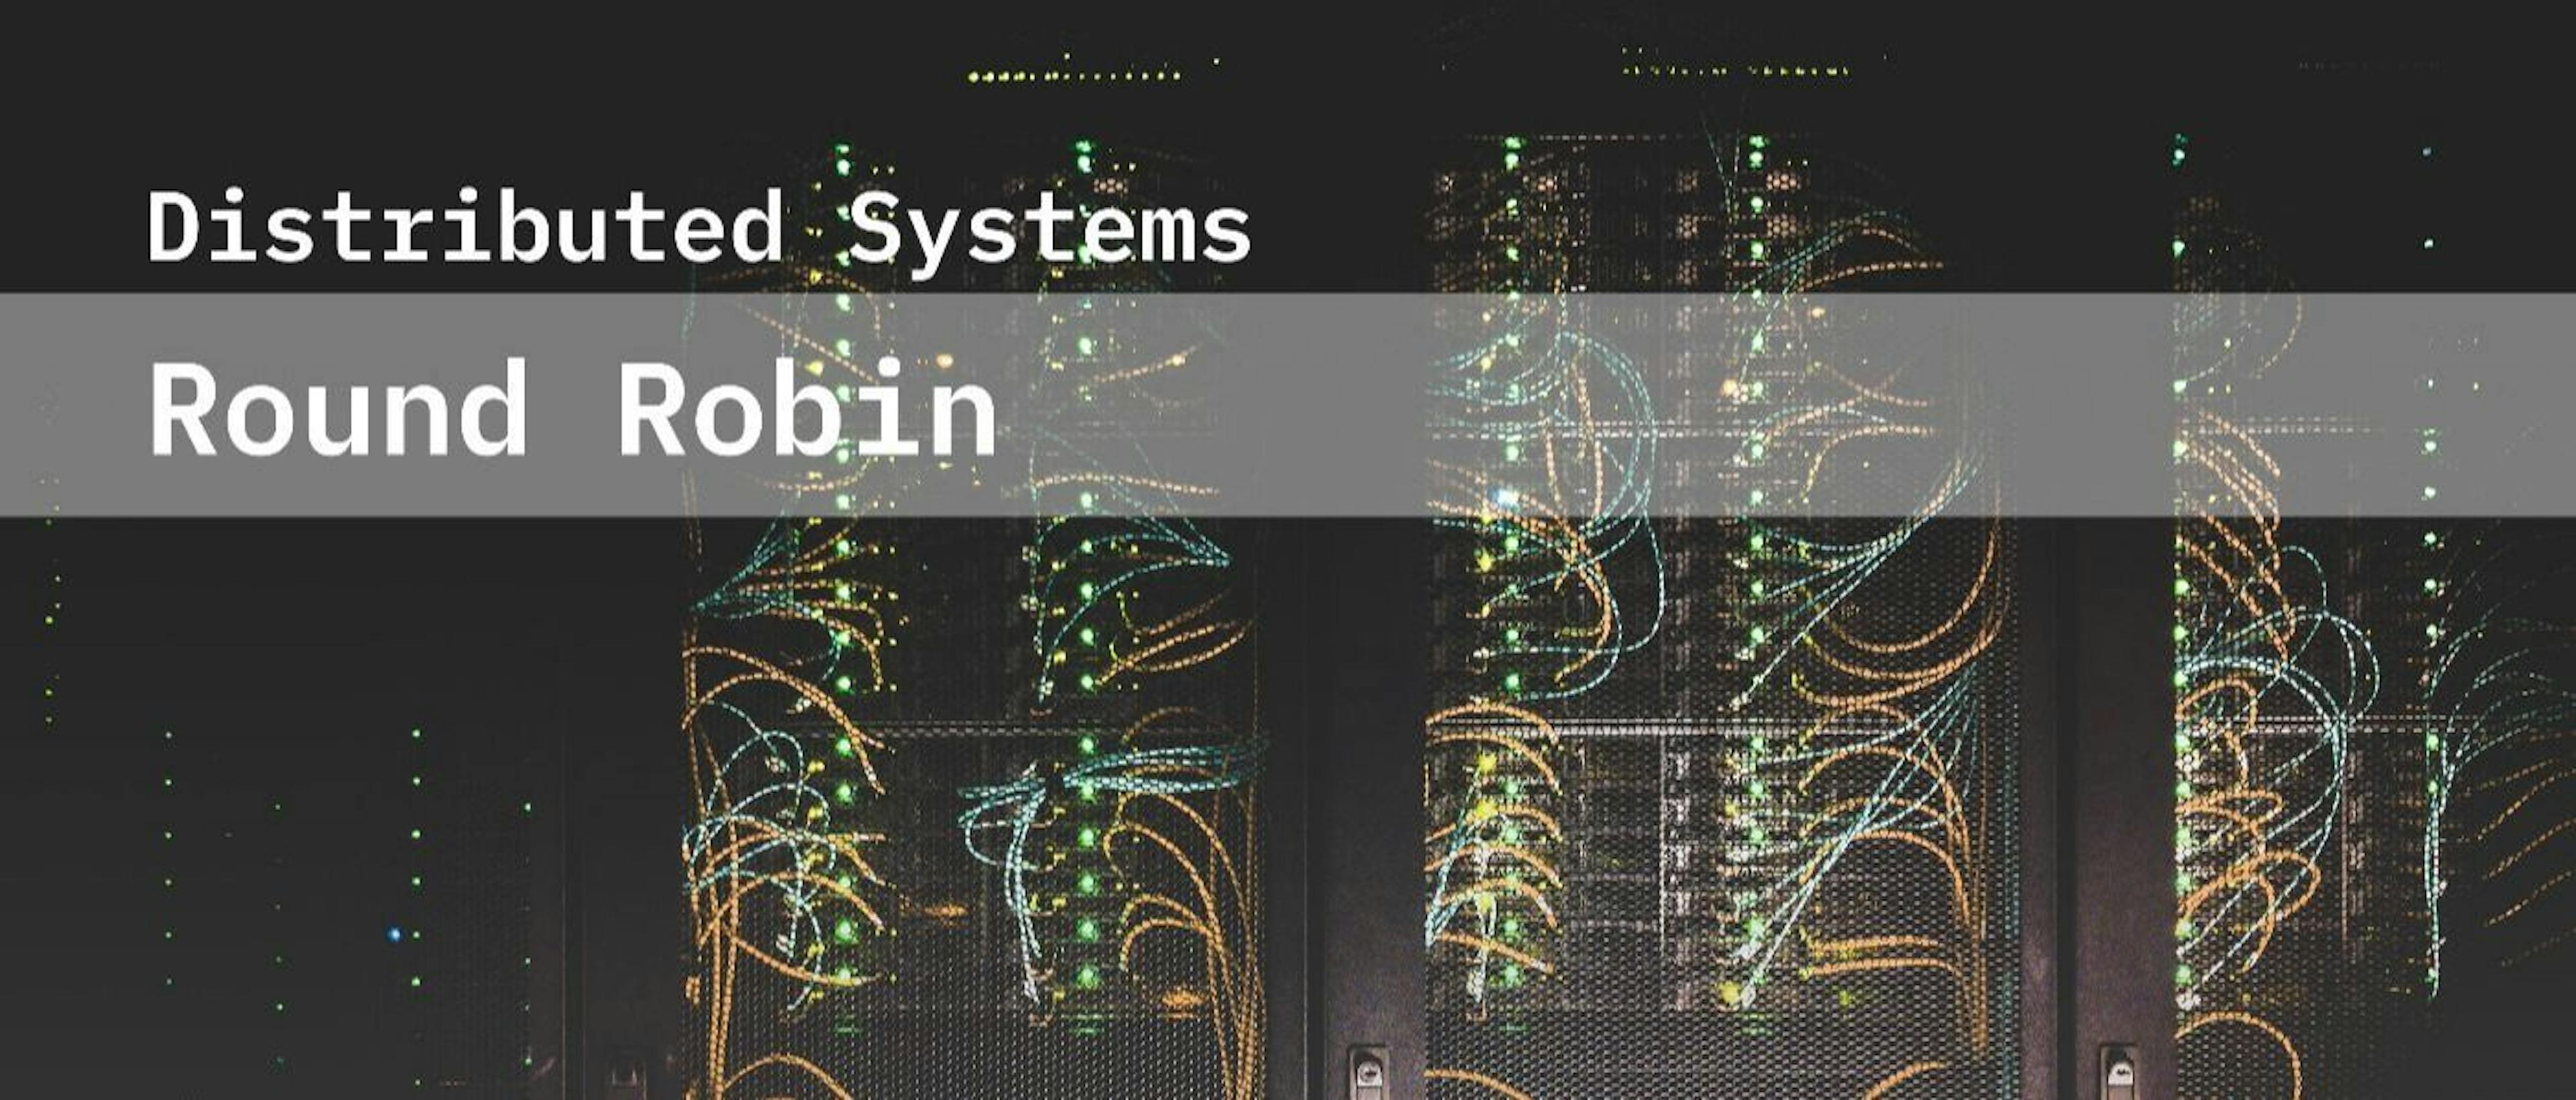 /round-robin-in-distributed-systems feature image